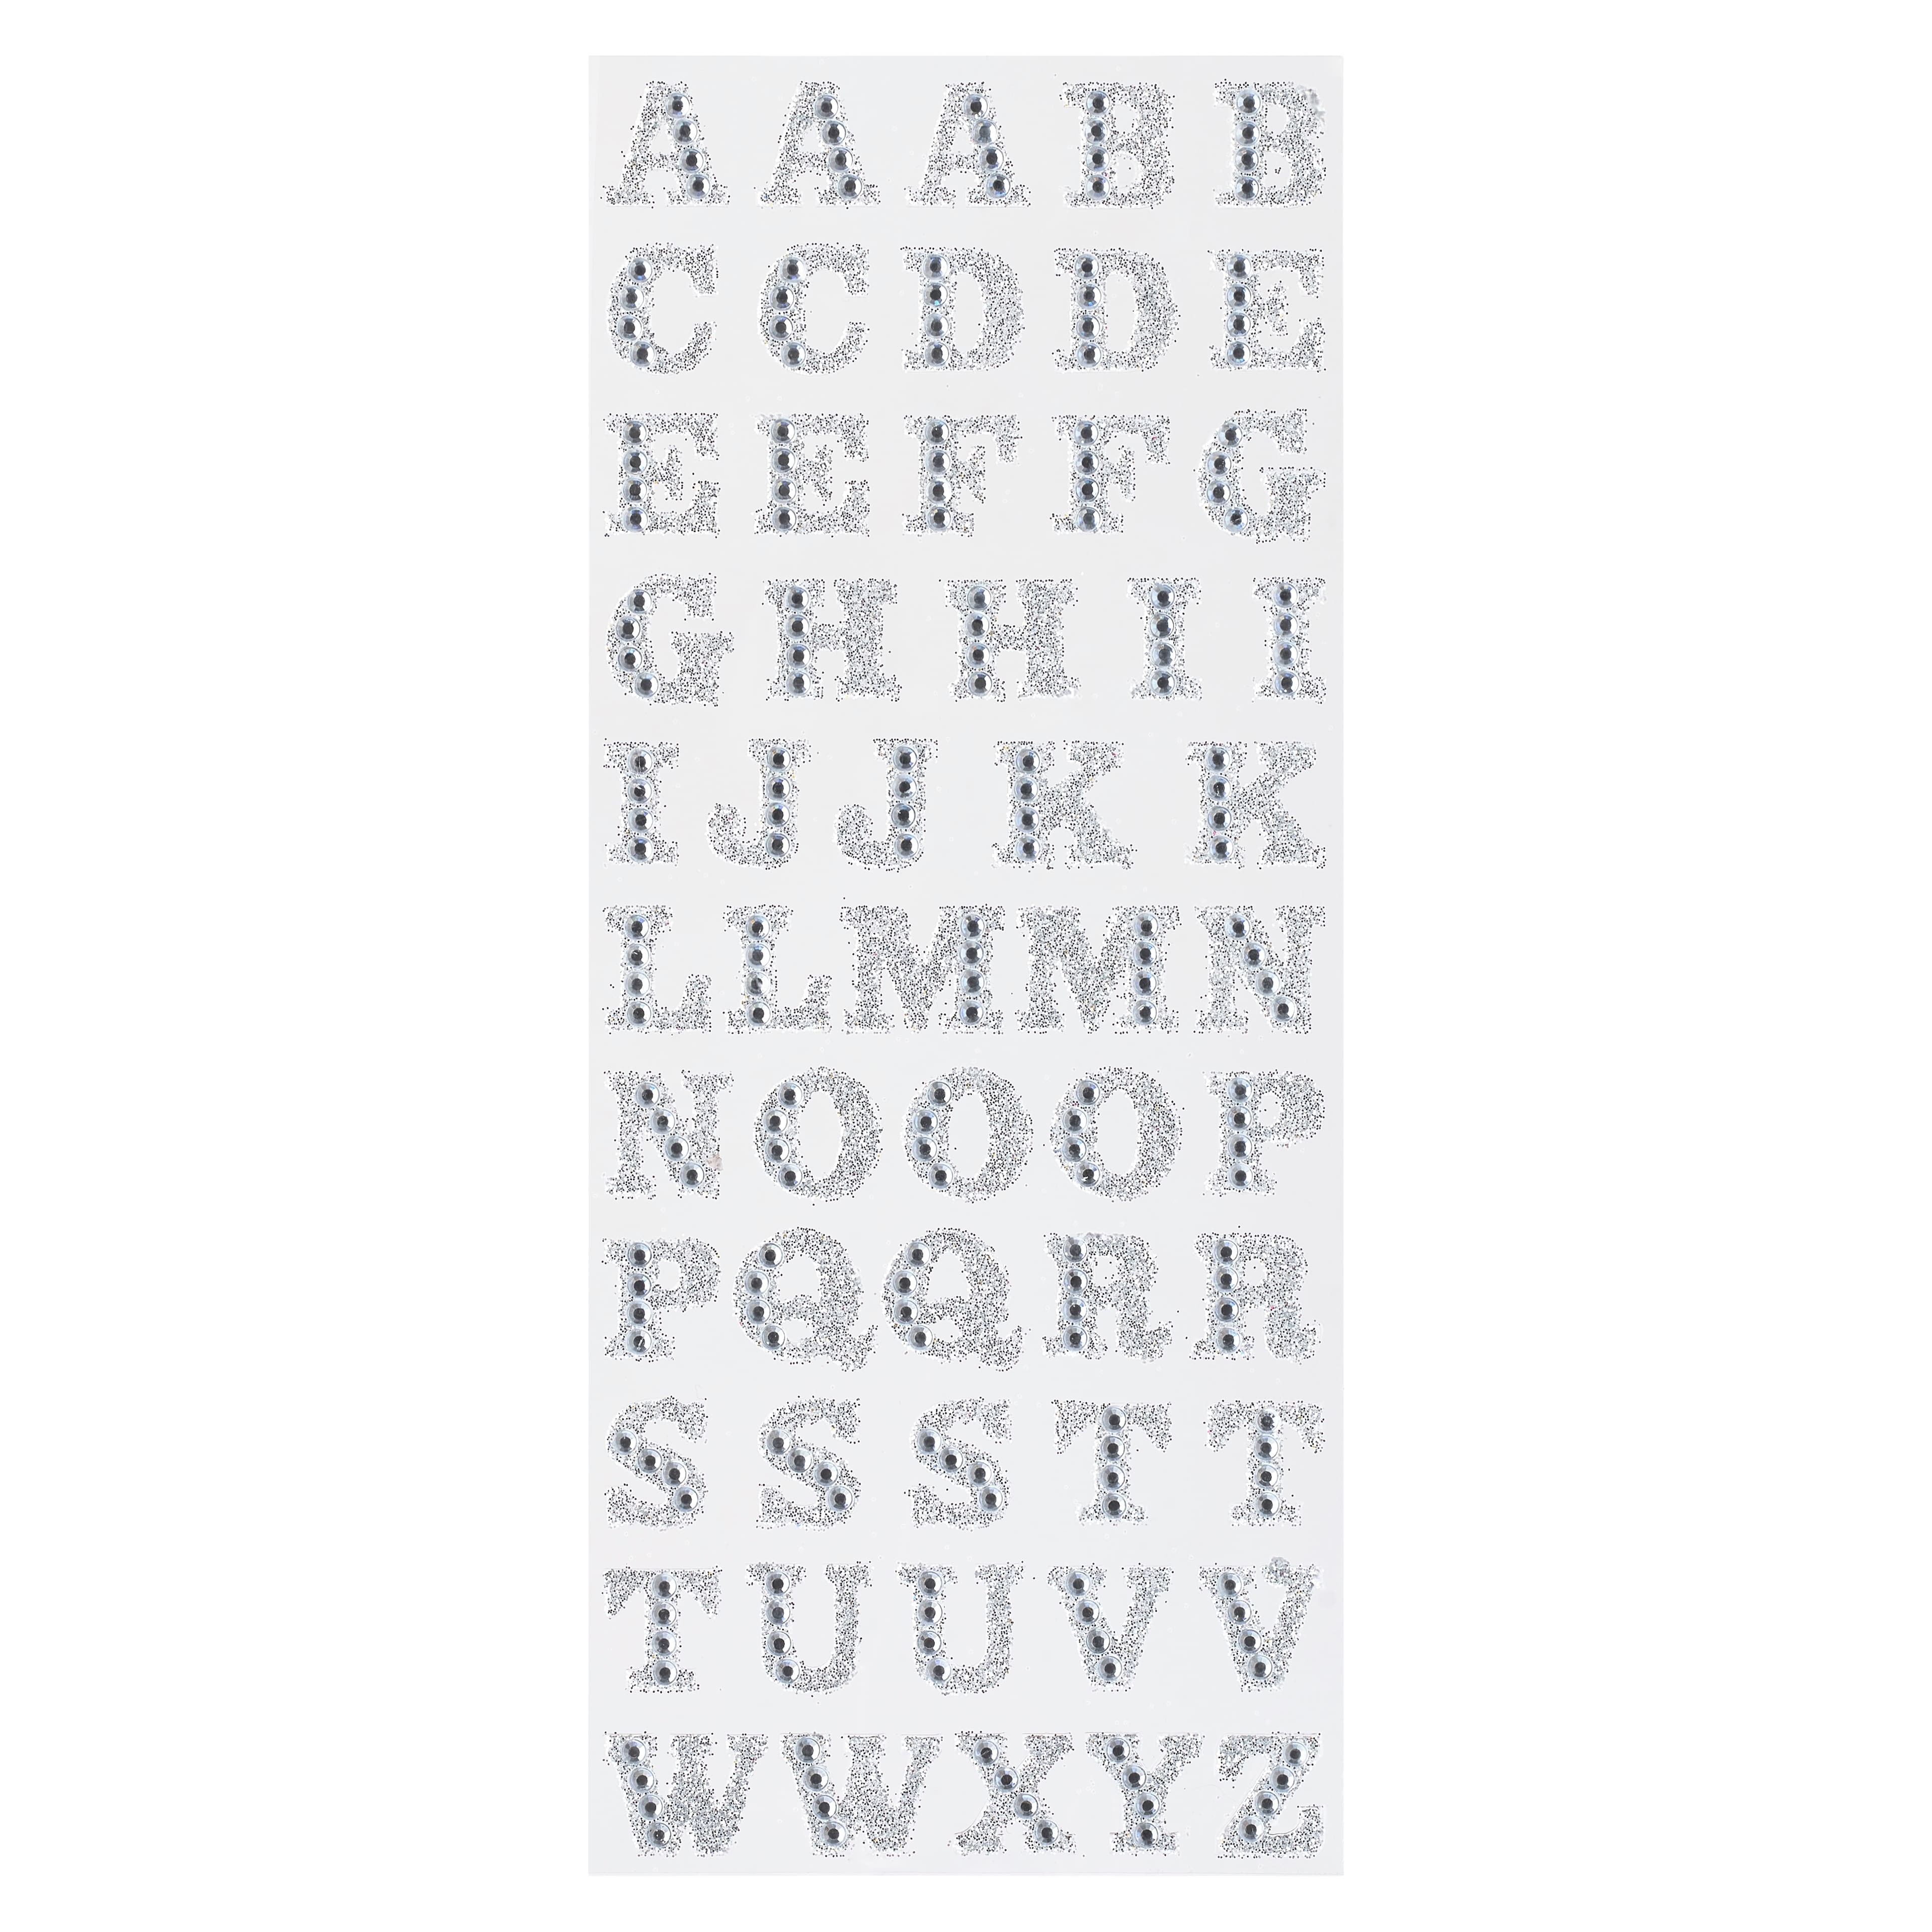 Recollections Glitter Rhinestone Letters Alphabet Stickers - 55 ct